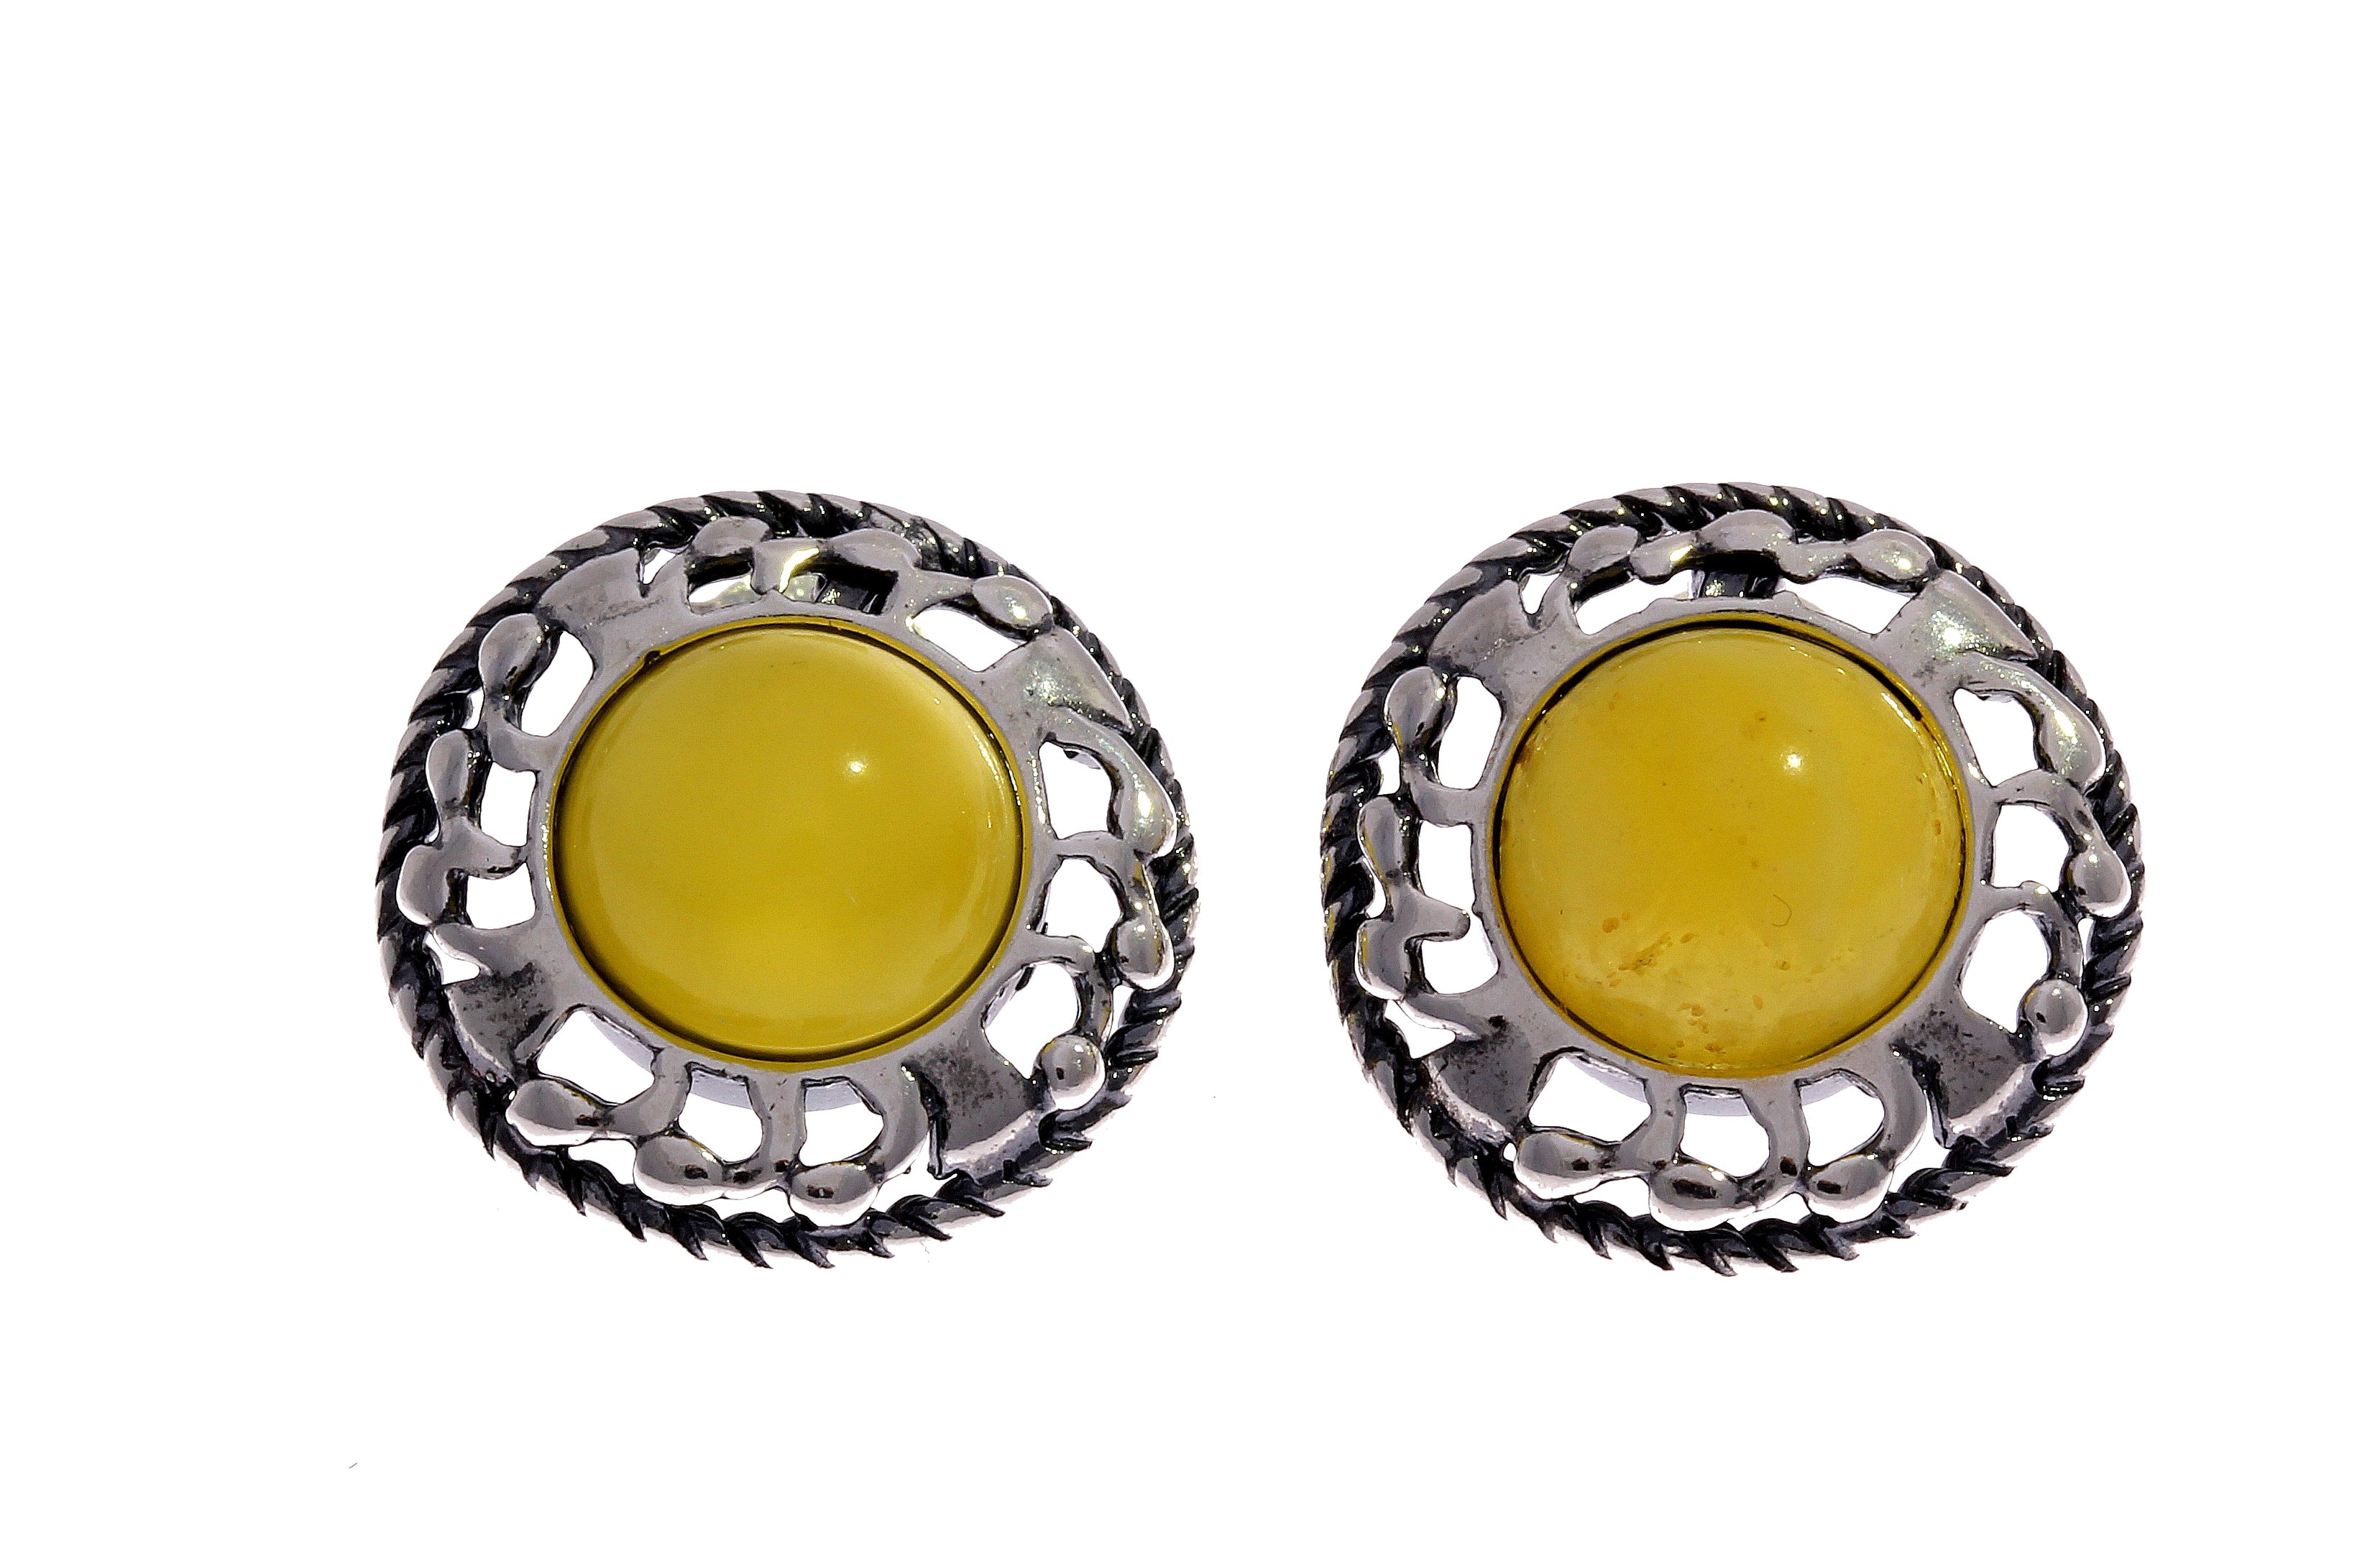 925 Sterling Silver & Genuine Baltic Amber Classic Round Studs Earrings - 8438